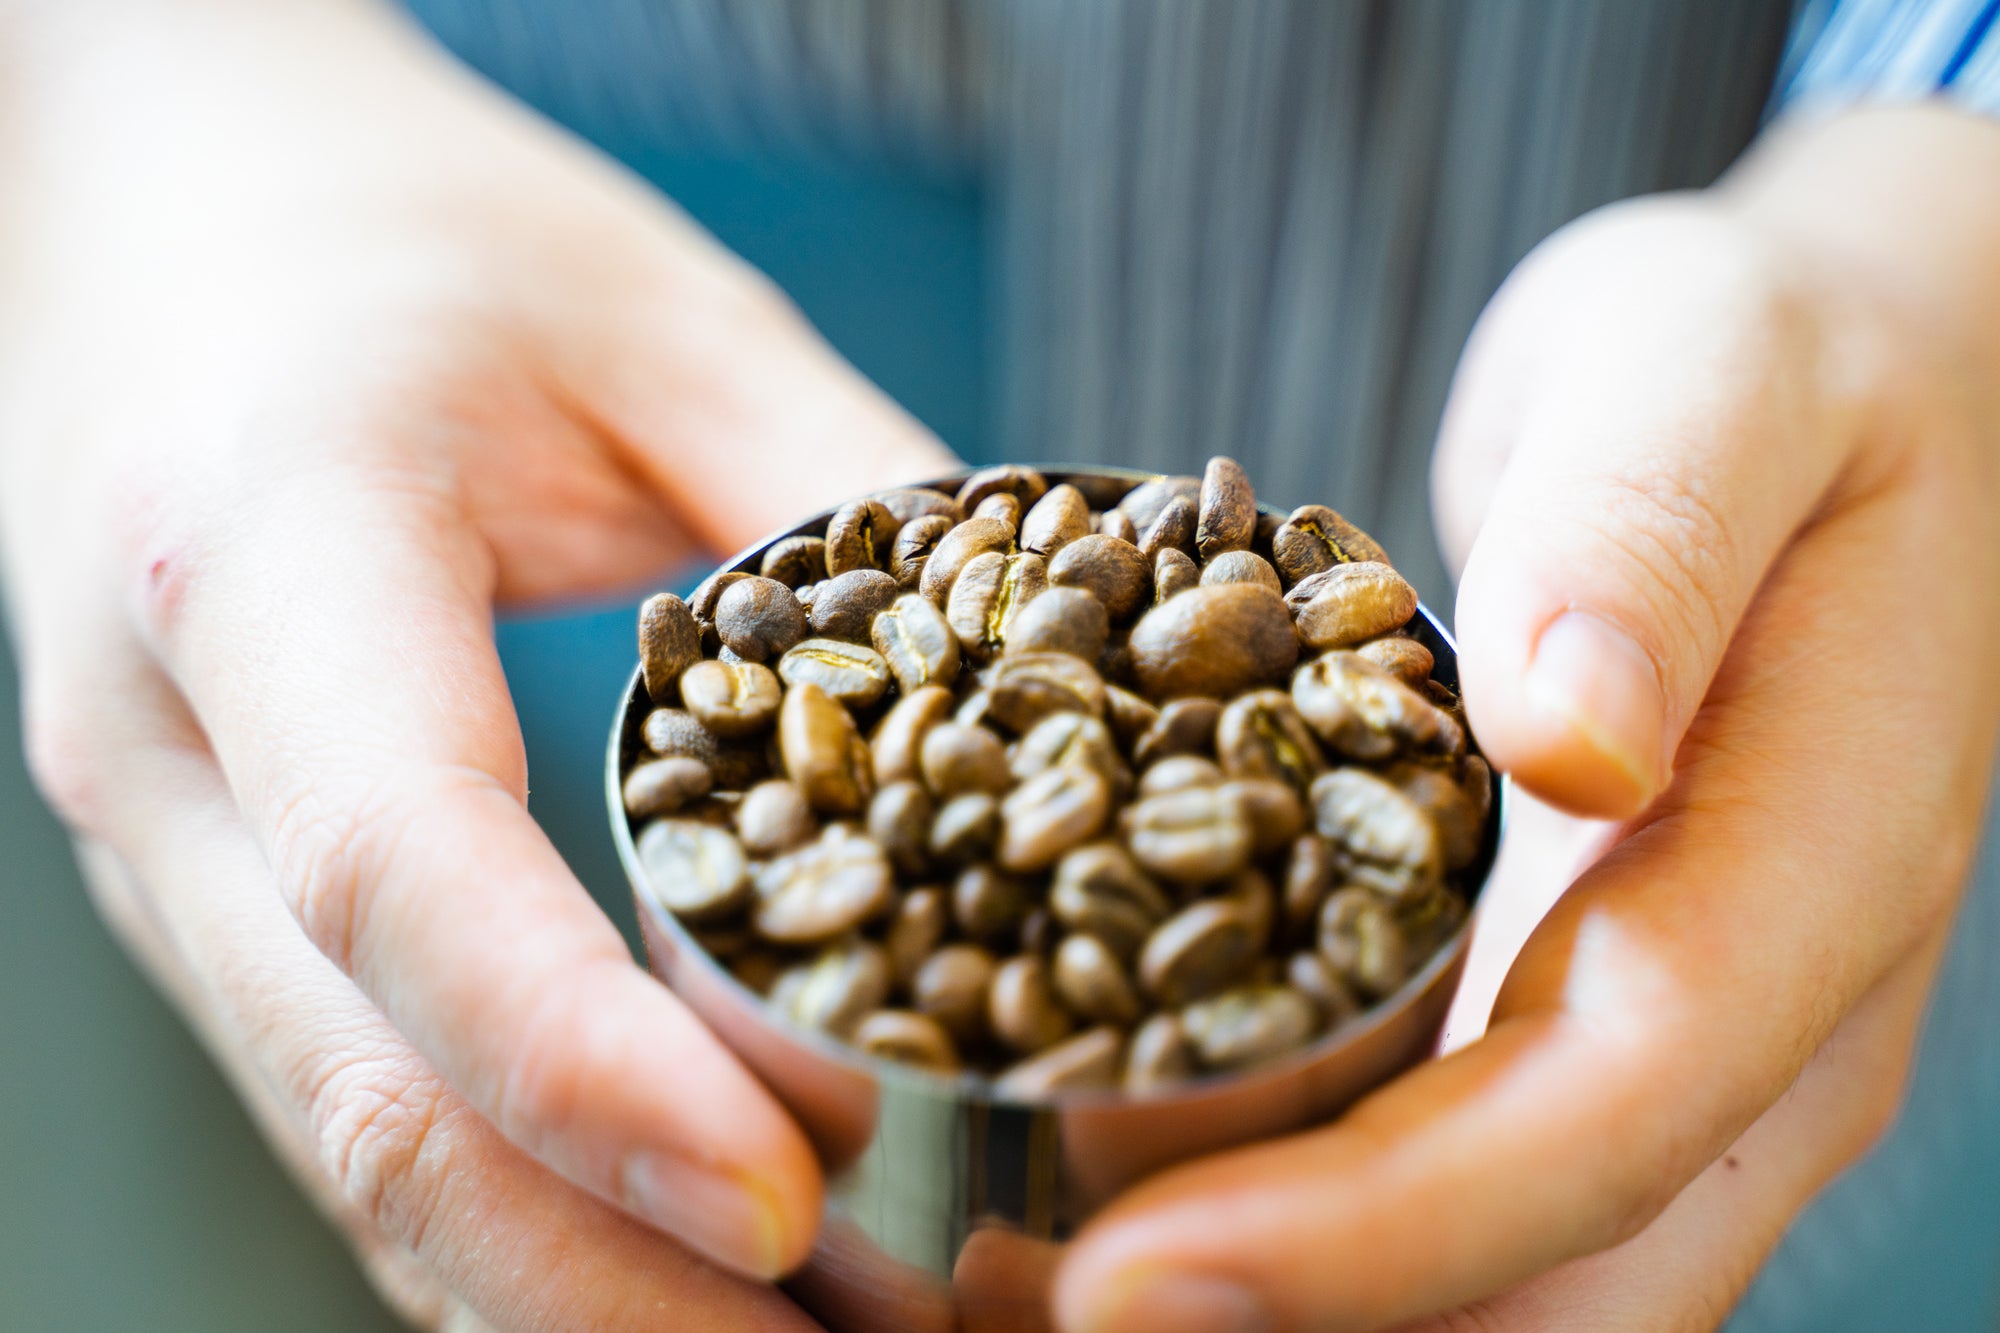 What's affecting coffee prices?